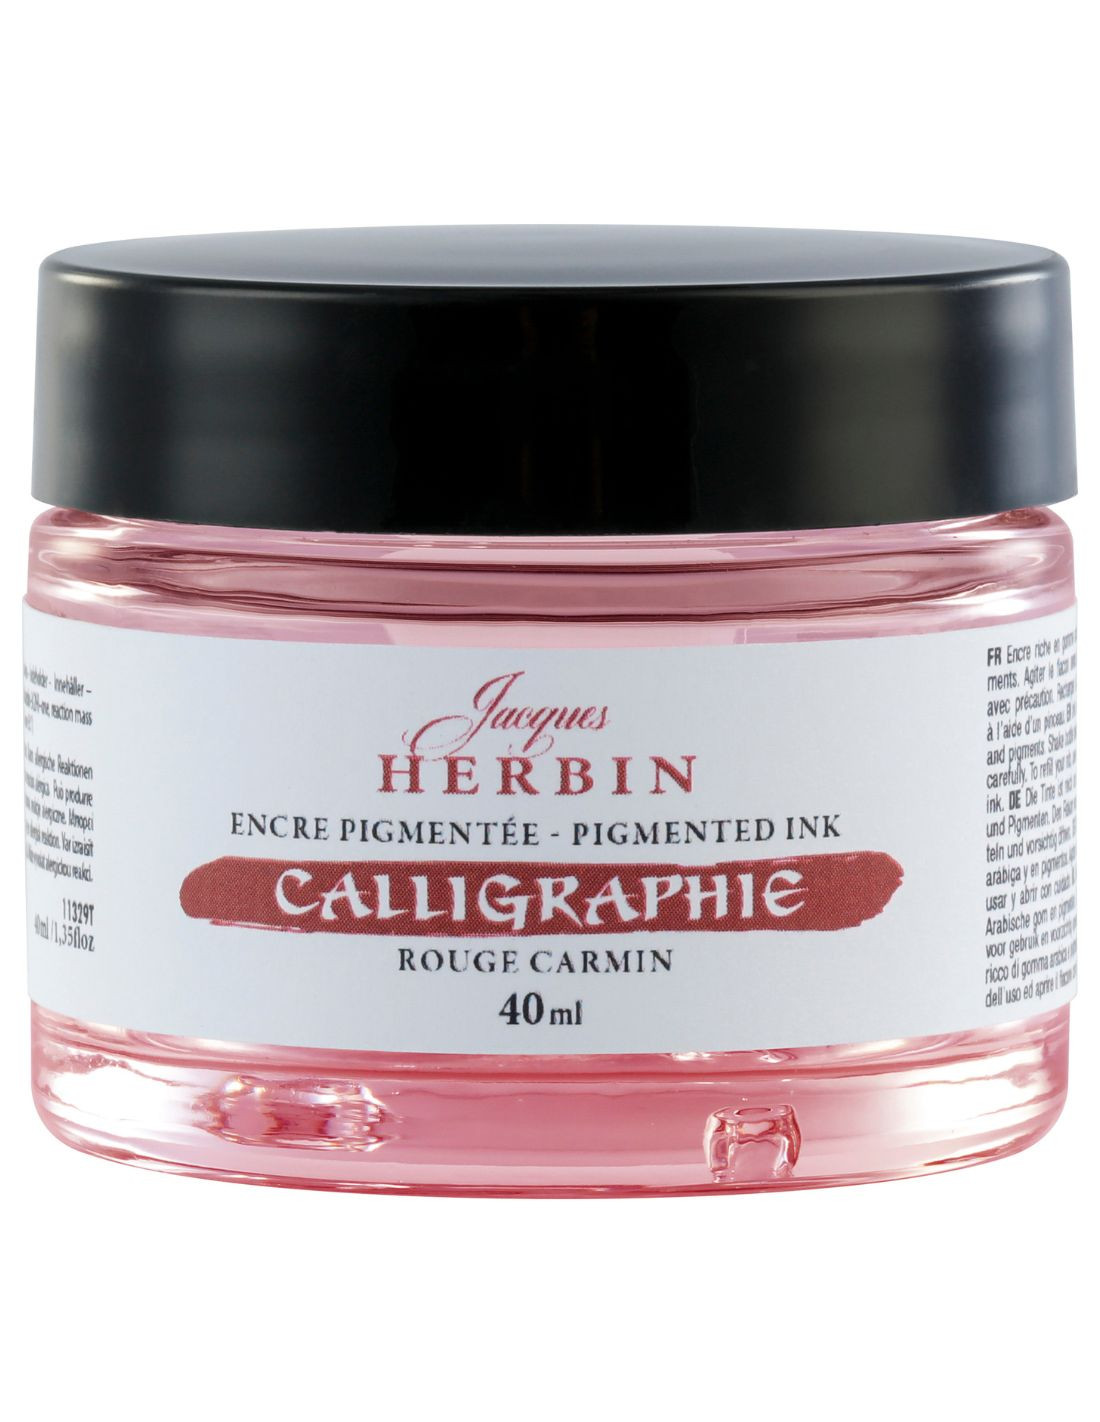 Jacques Herbin Pigmented Calligraphy Ink - Rouge Carmin - Carmine - 40ml Bottle